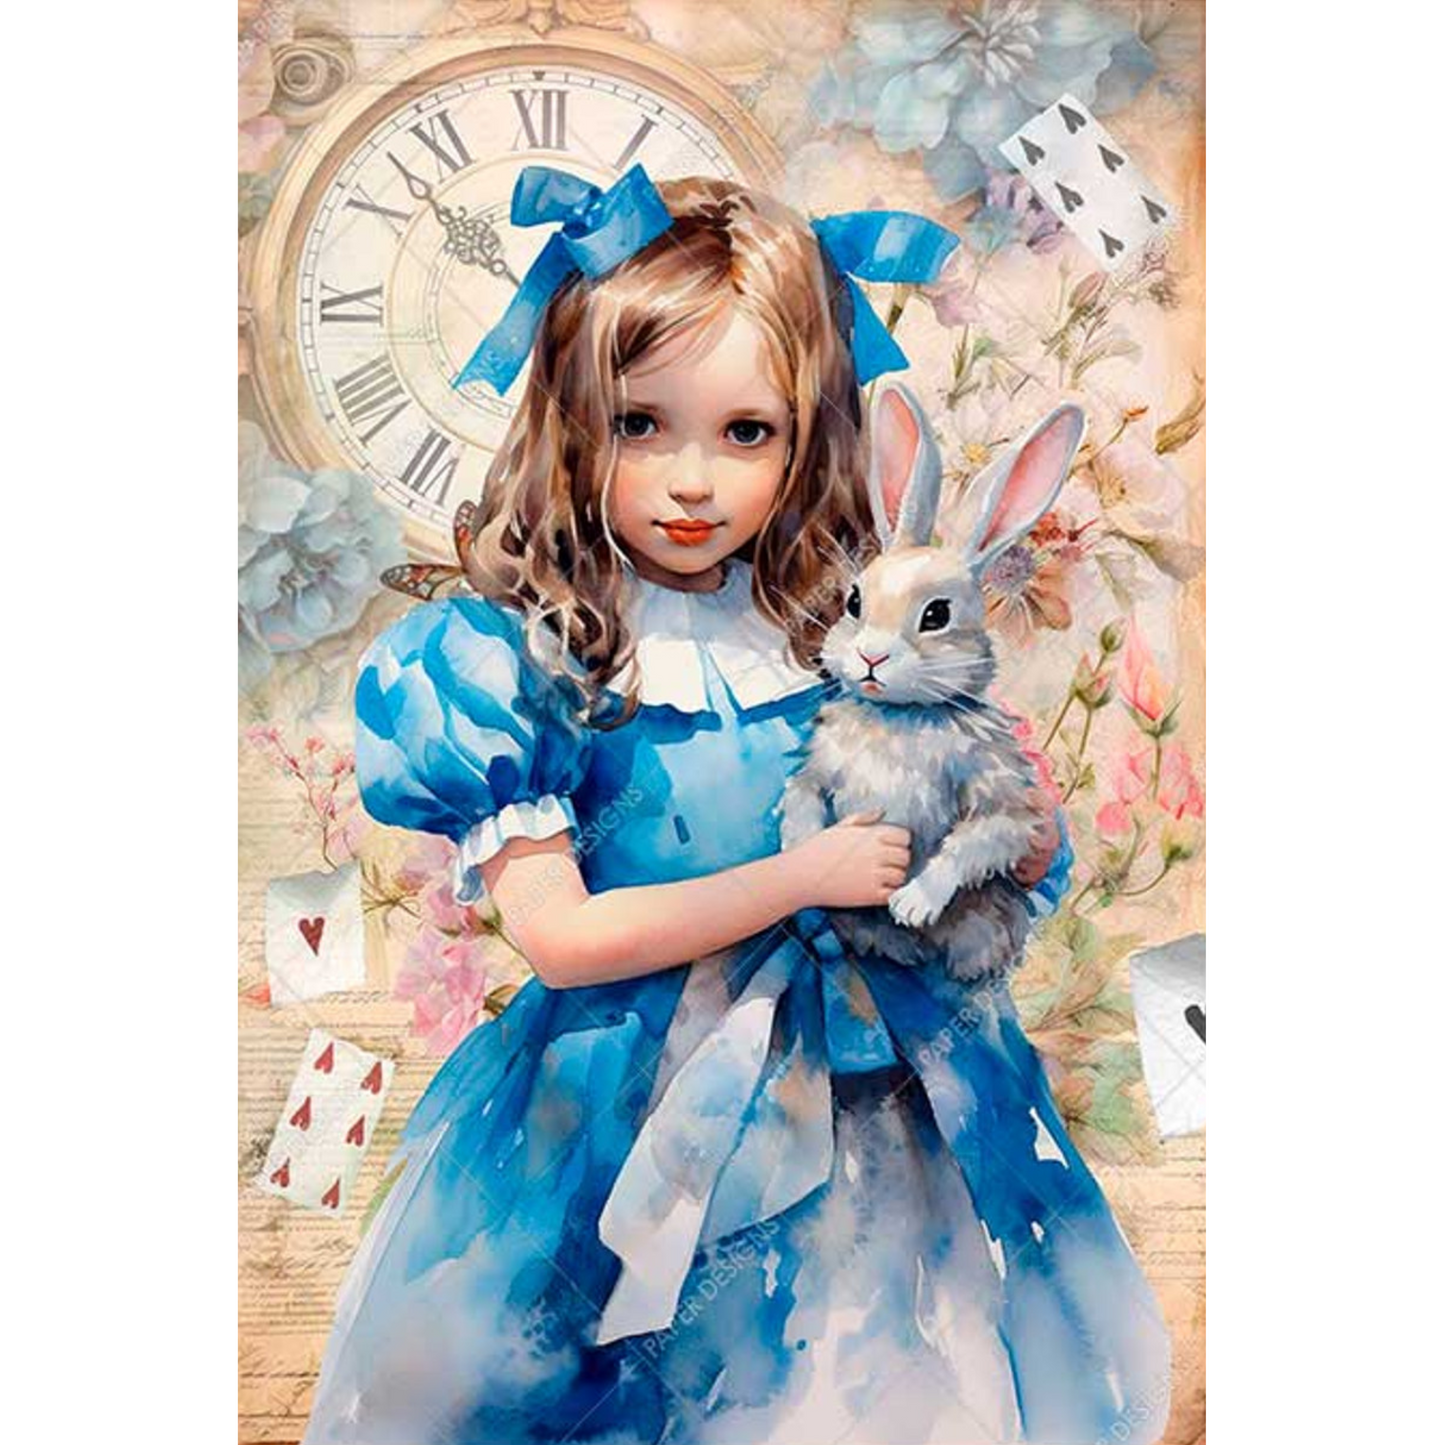 "Alice in Wonderland" decoupage rice paper by Paper Designs. Available at Milton's Daughter.